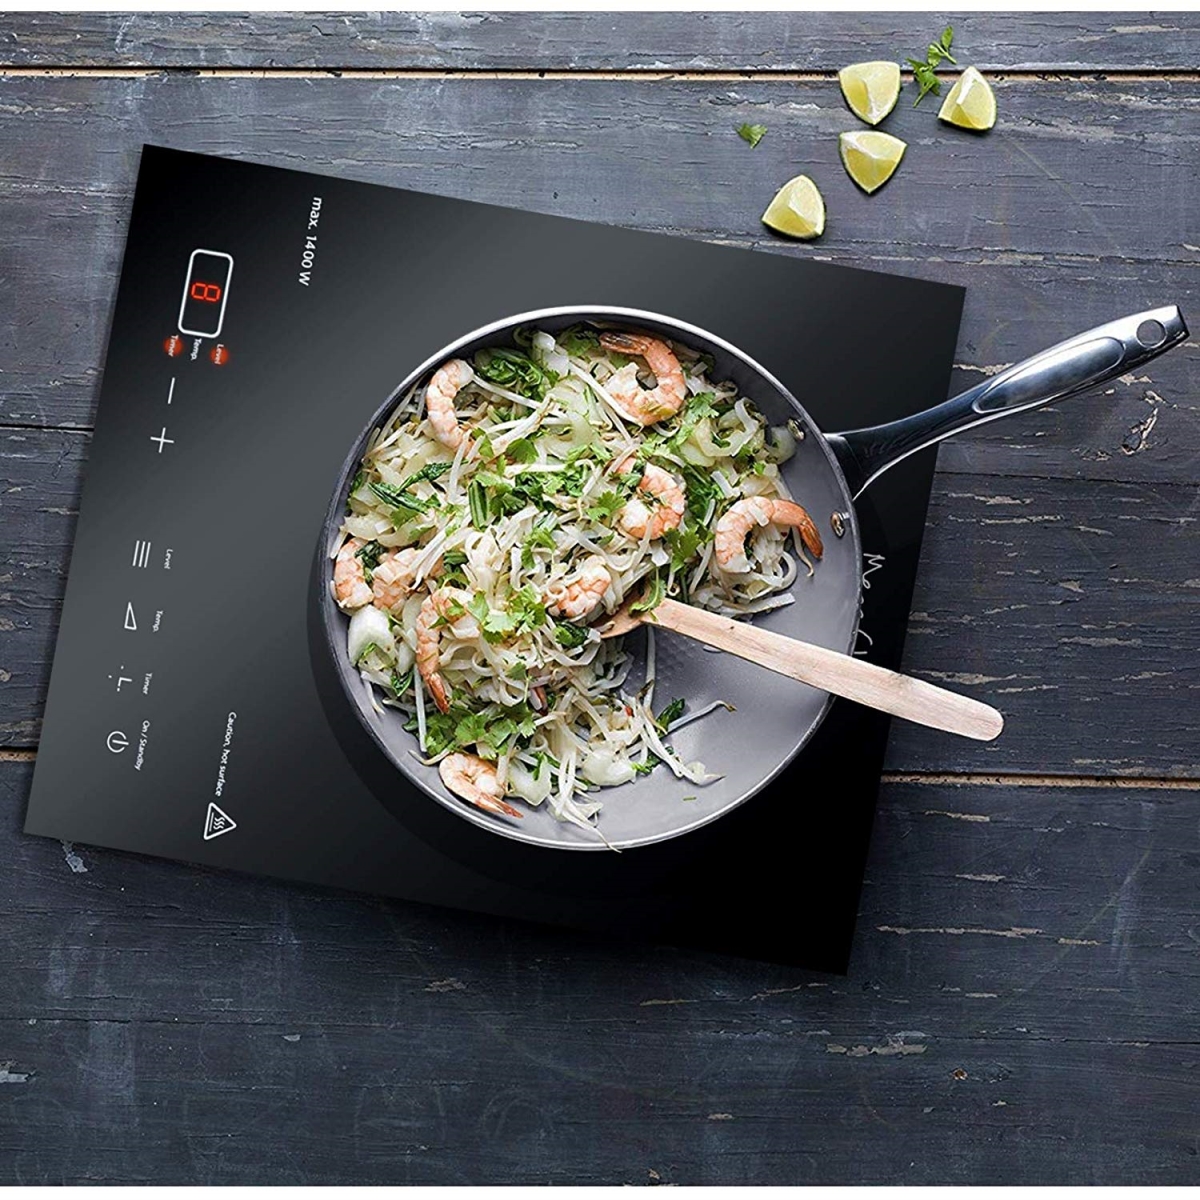 Mc-1400 Portable 1400w Single Induction Cooktop With Digital Control Panel - Black